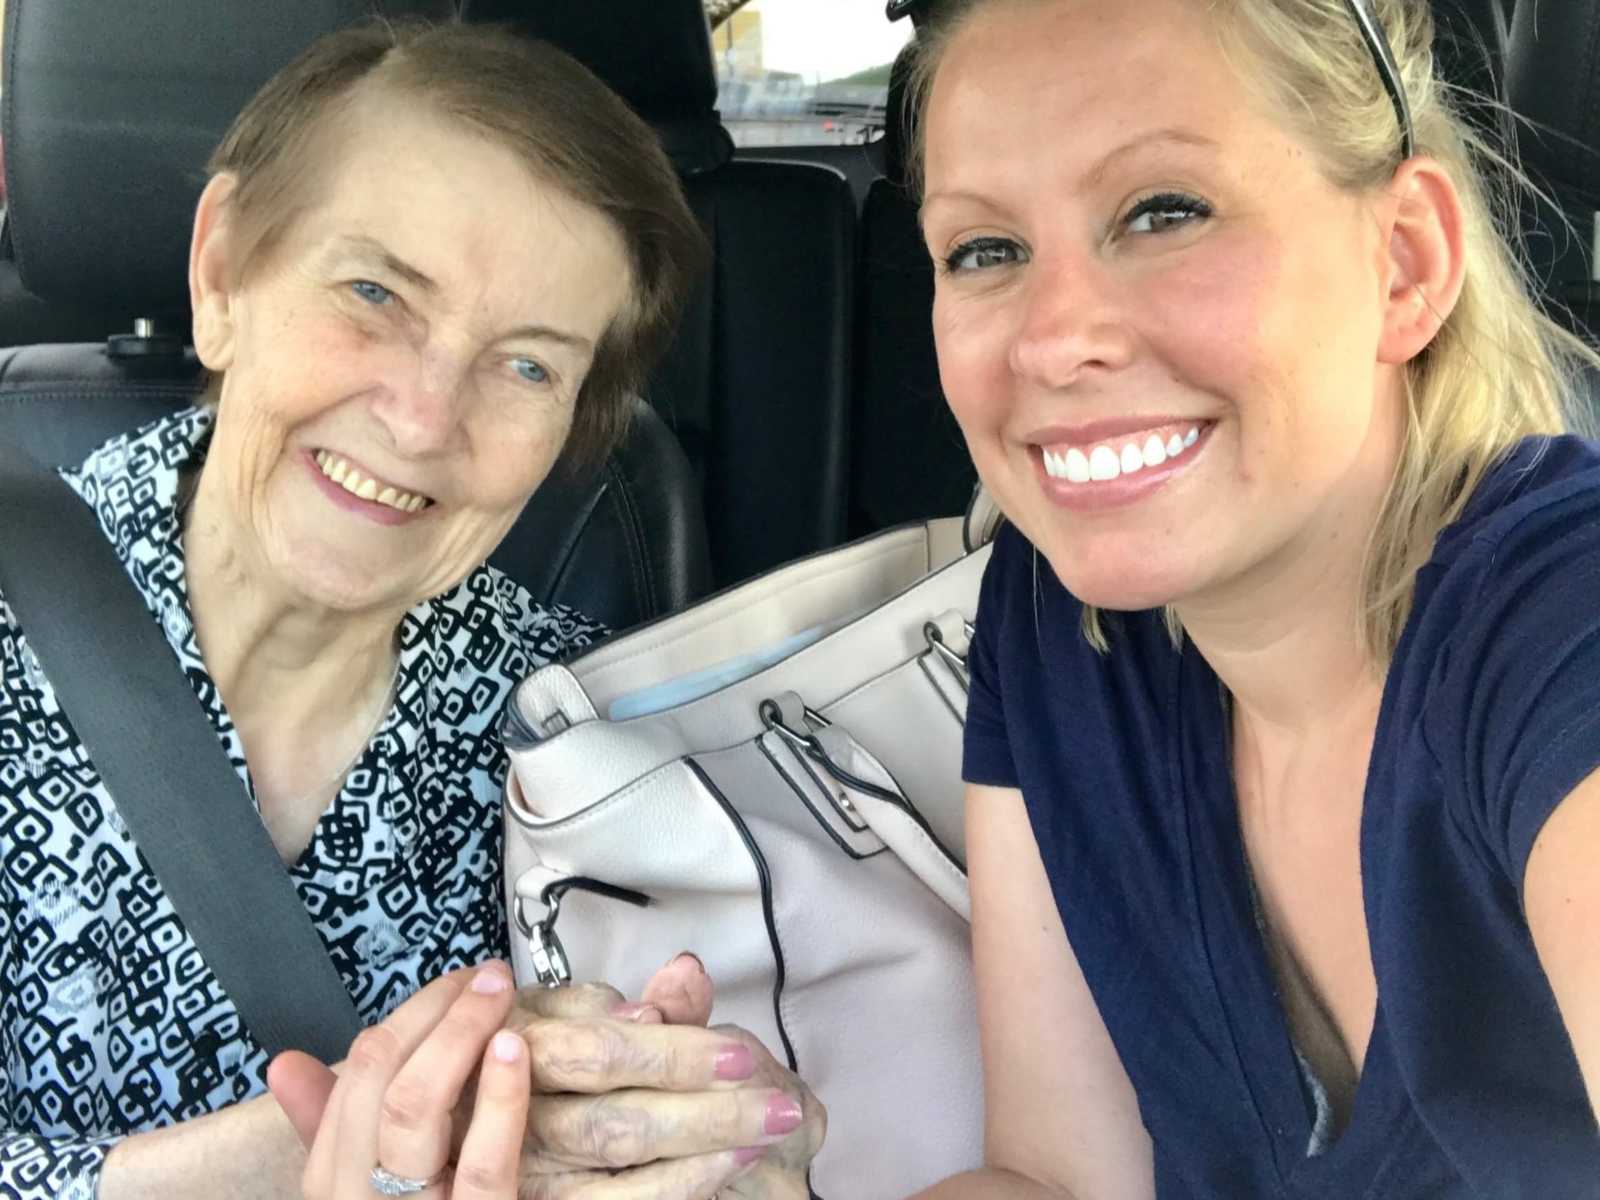 granddaughter takes smiling selfie in car with grandmother who had alzheimers